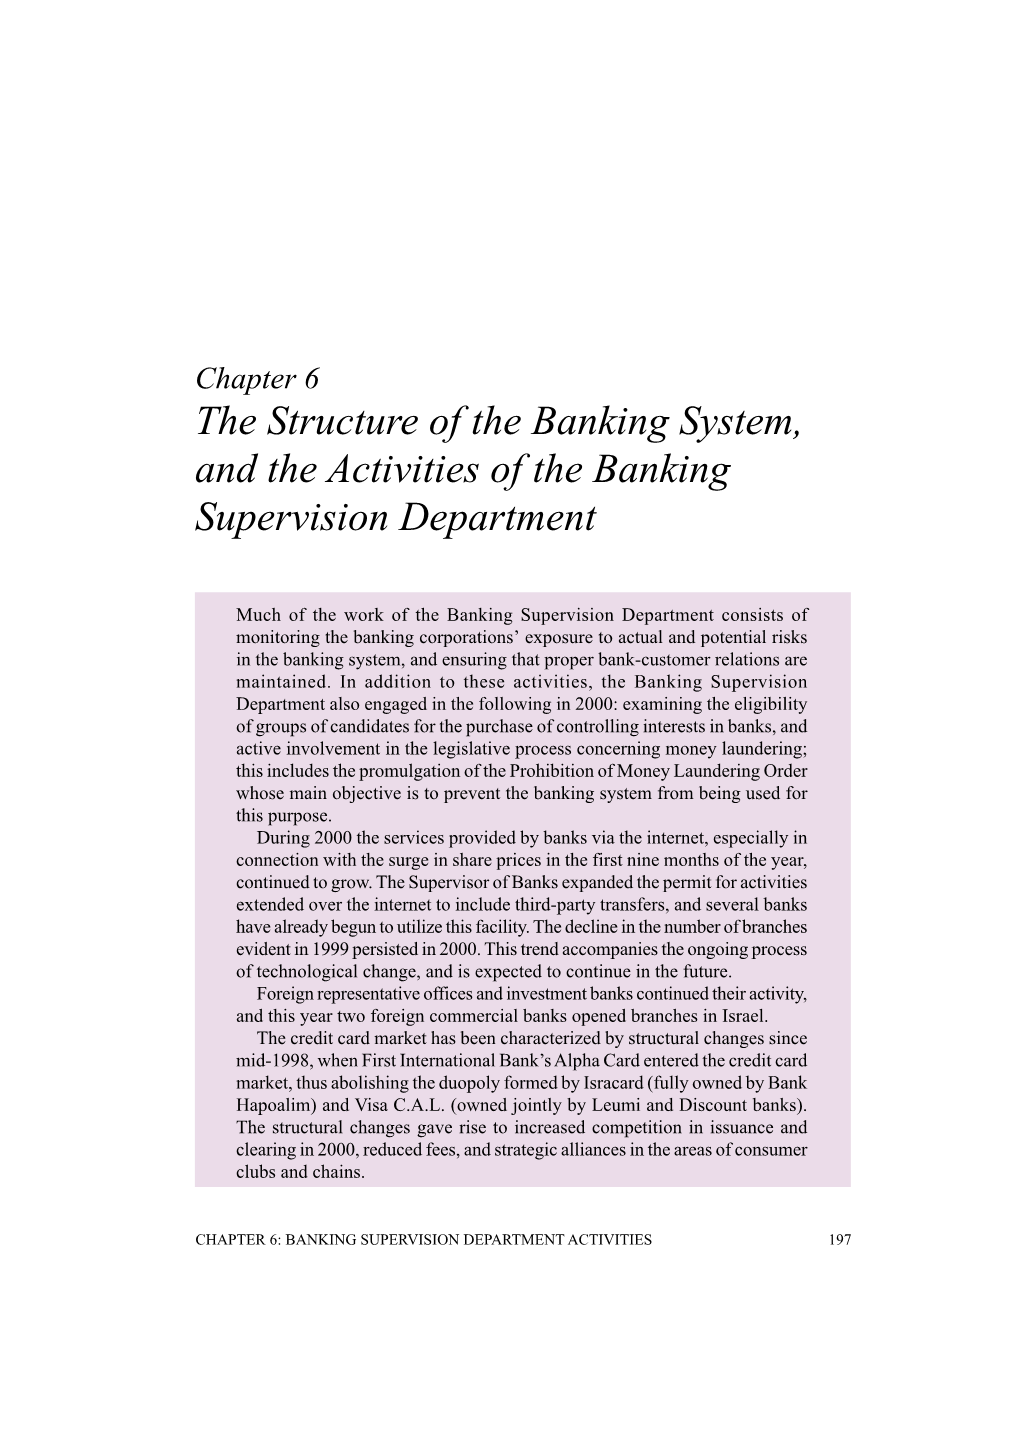 The Structure of the Banking System, and the Activities of the Banking Supervision Department